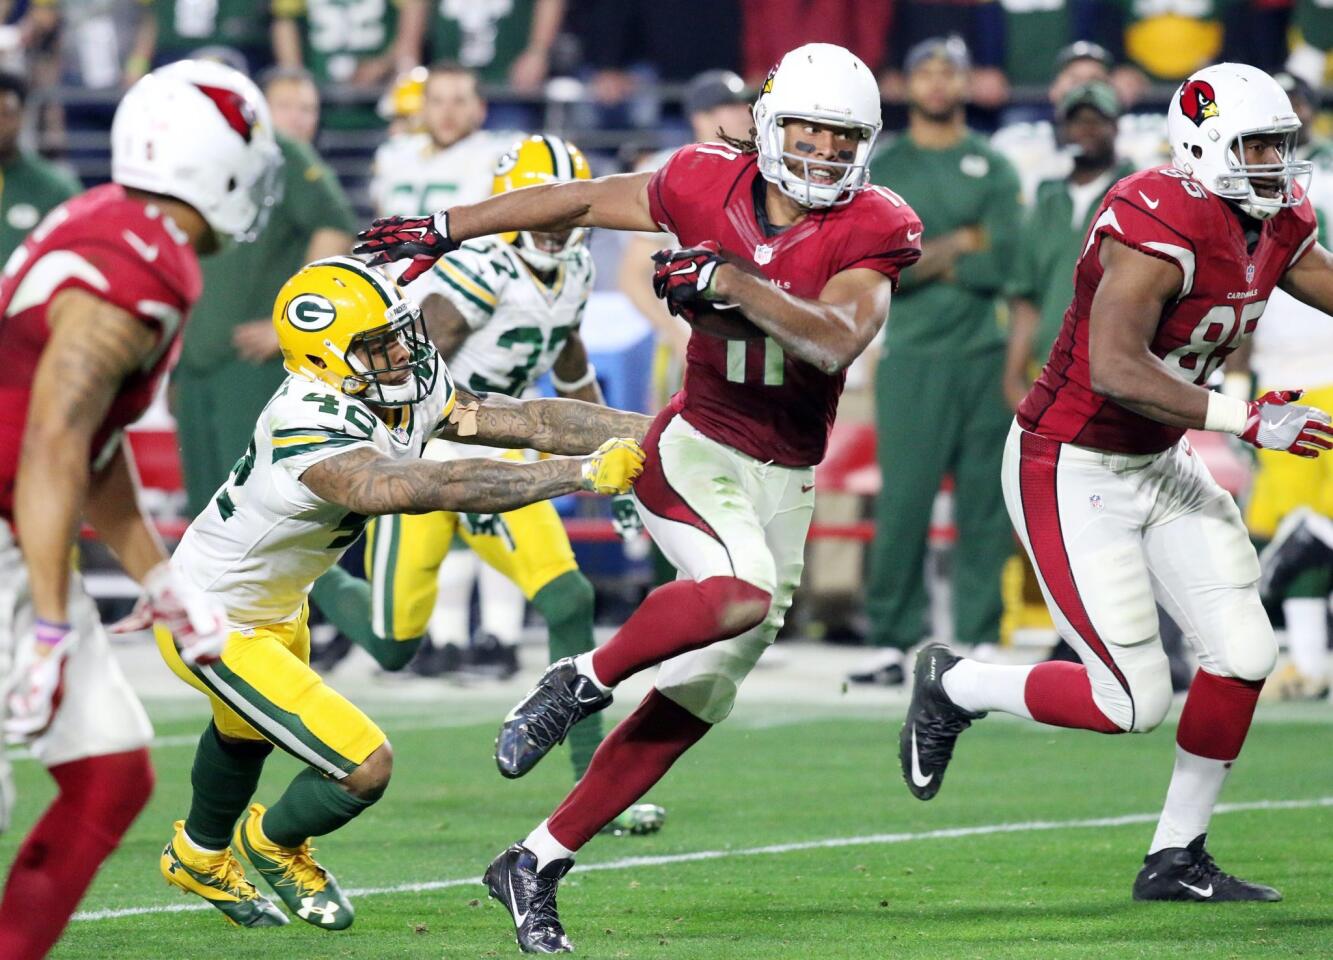 Arizona Cardinals' Larry Fitzgerald (C) breaks away from Green Bay Packers' Morgan Burnett (2-L) for a 75-yard pass reception to set up the winning touchdown during their NFL Playoff game, in Glendale, Arizona, USA, 16 January 2016.